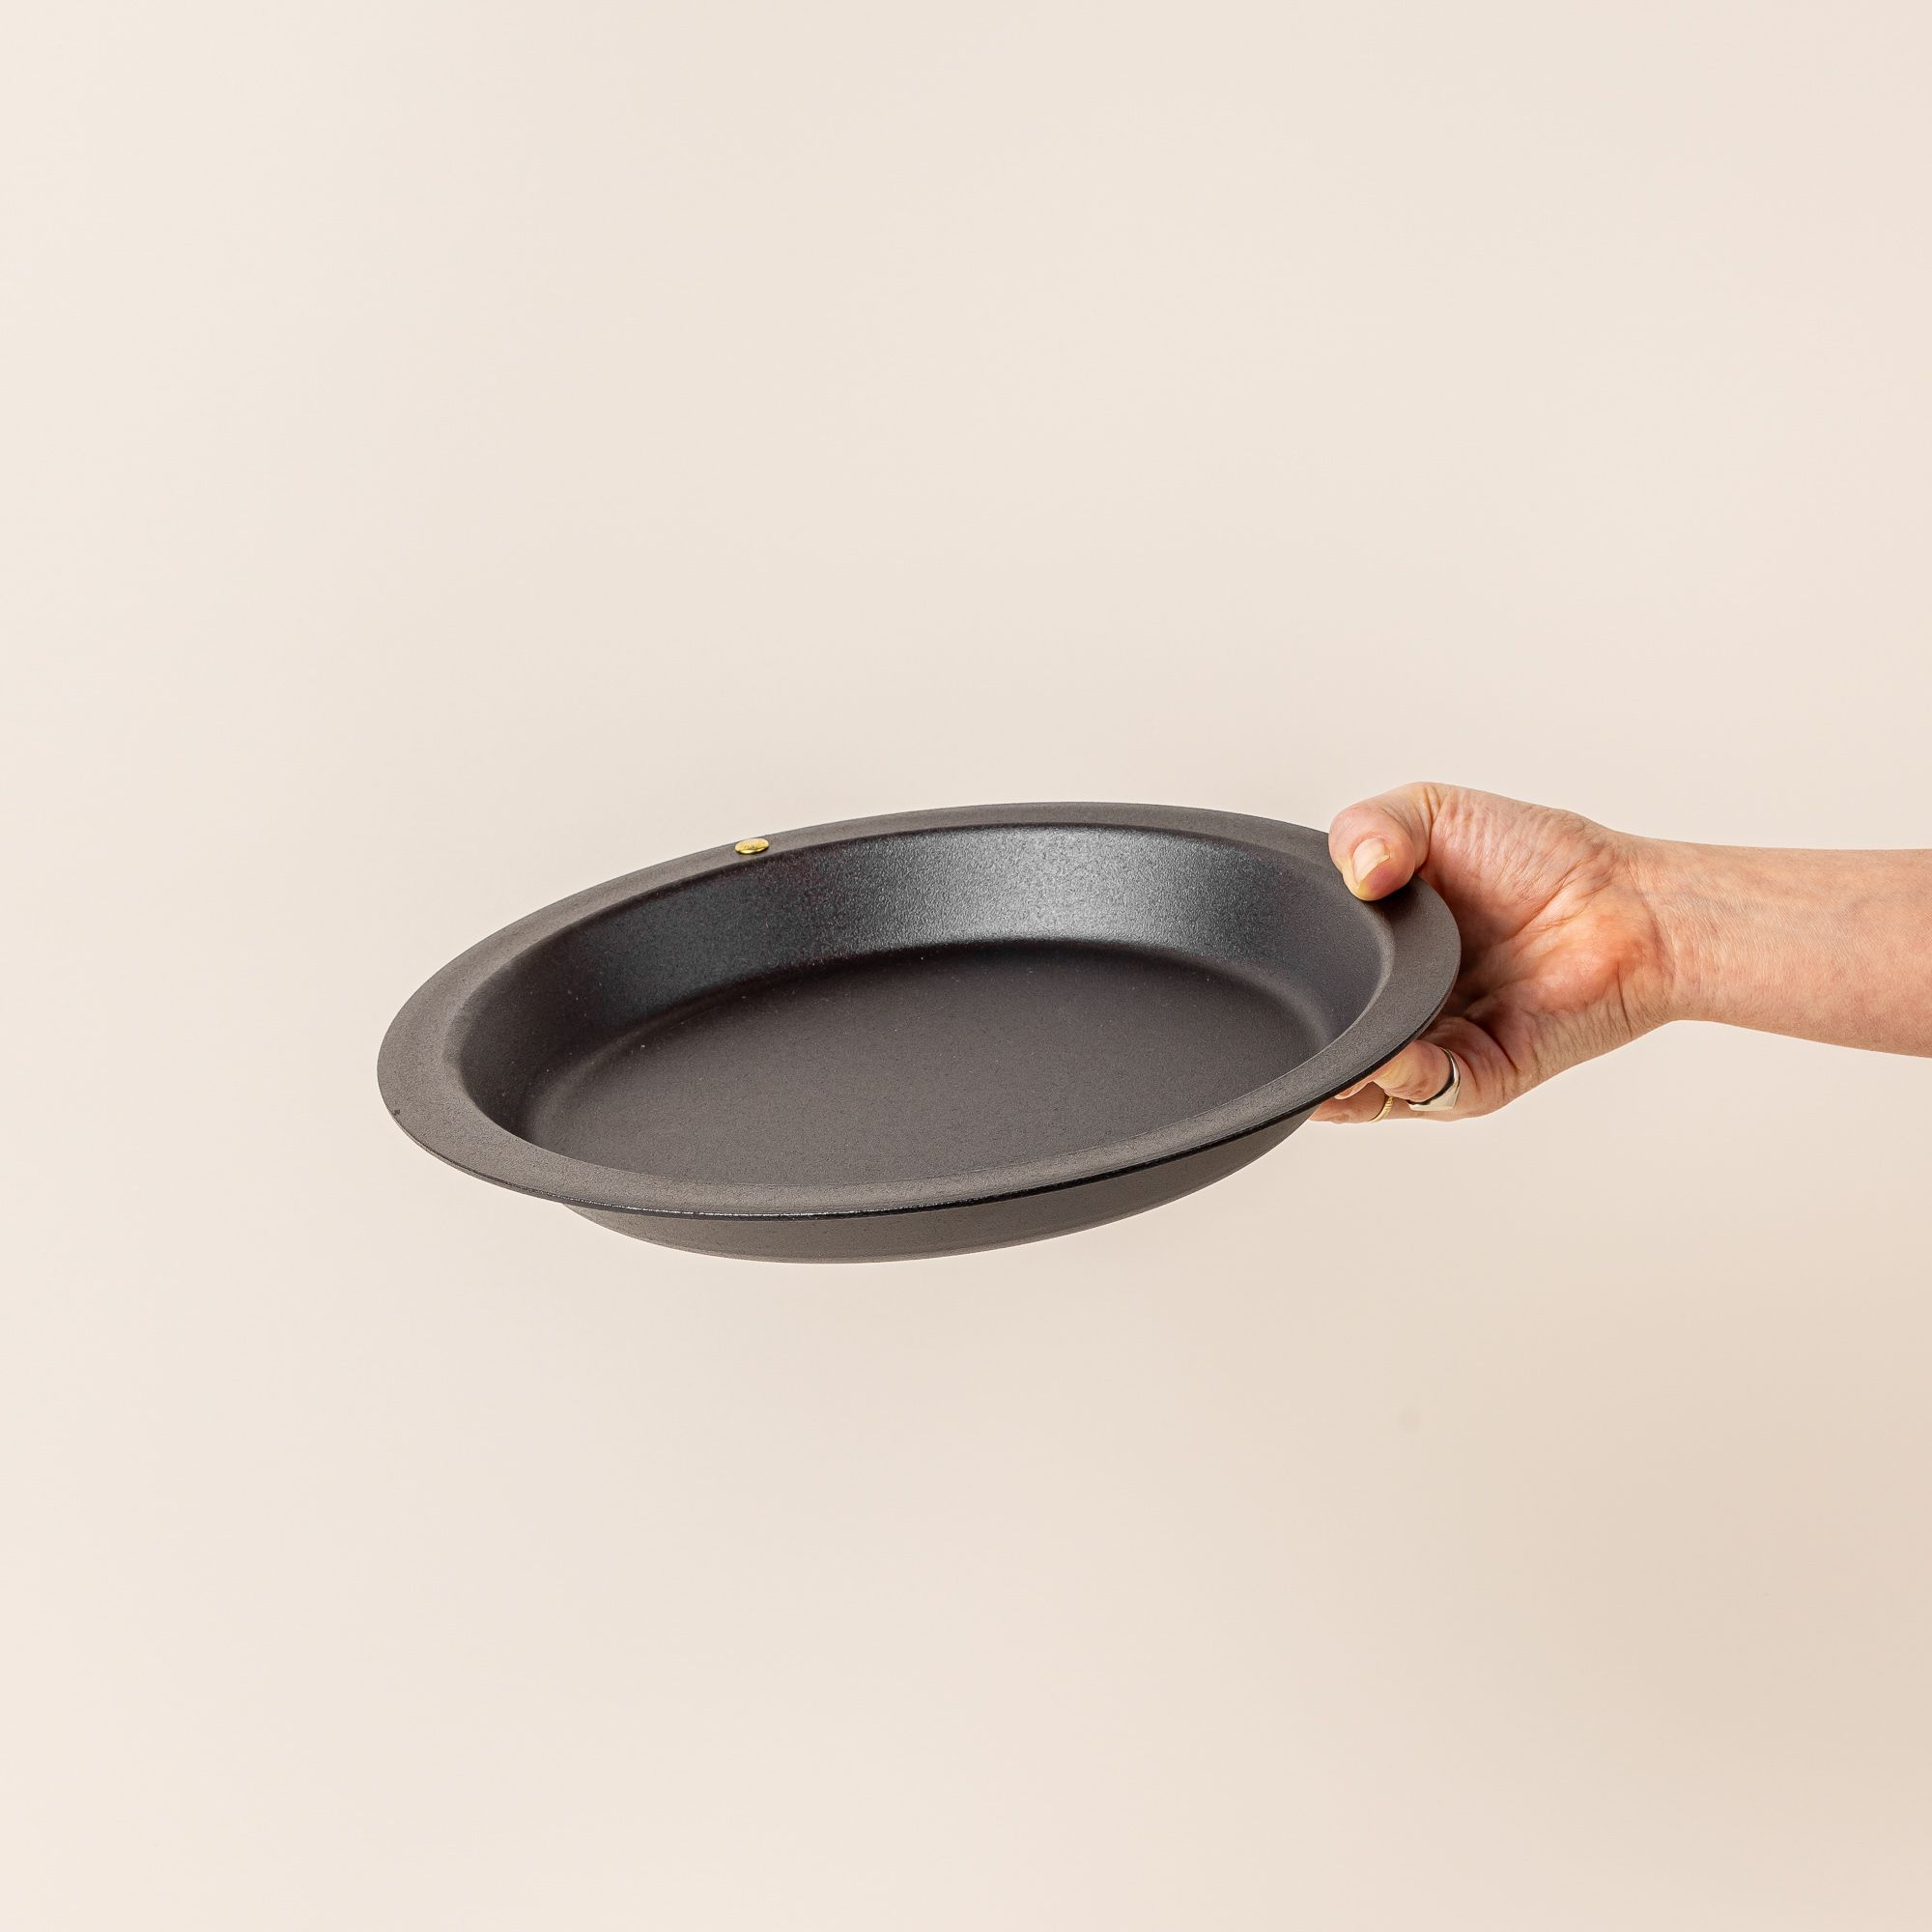 A hand holds a simple iron pie plate with a wide rim and shallow body